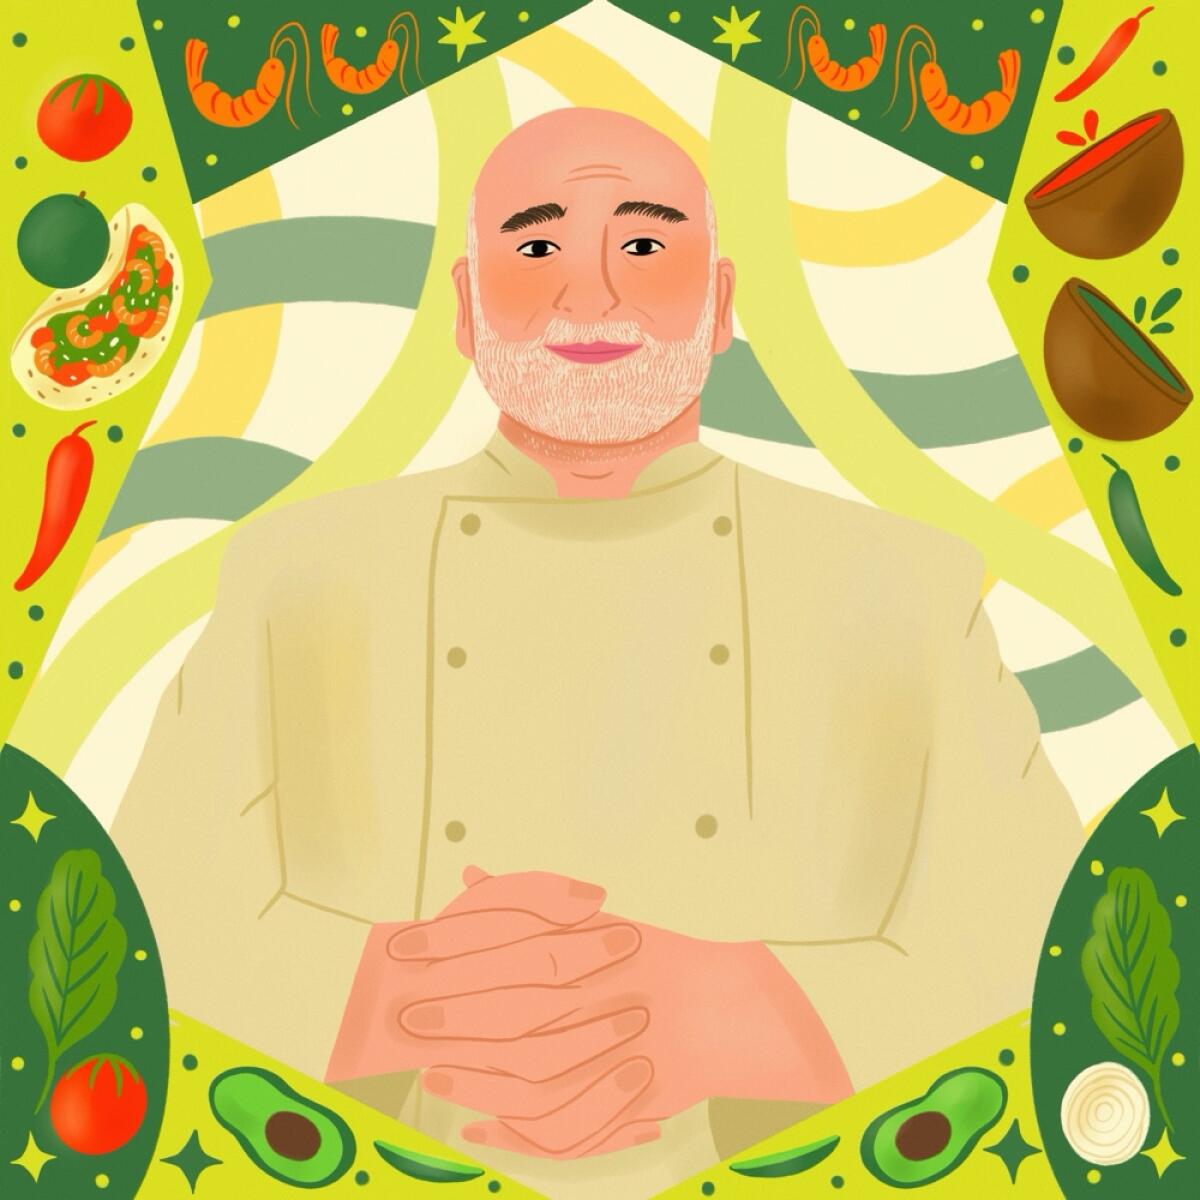 Illustration of Jose Andres